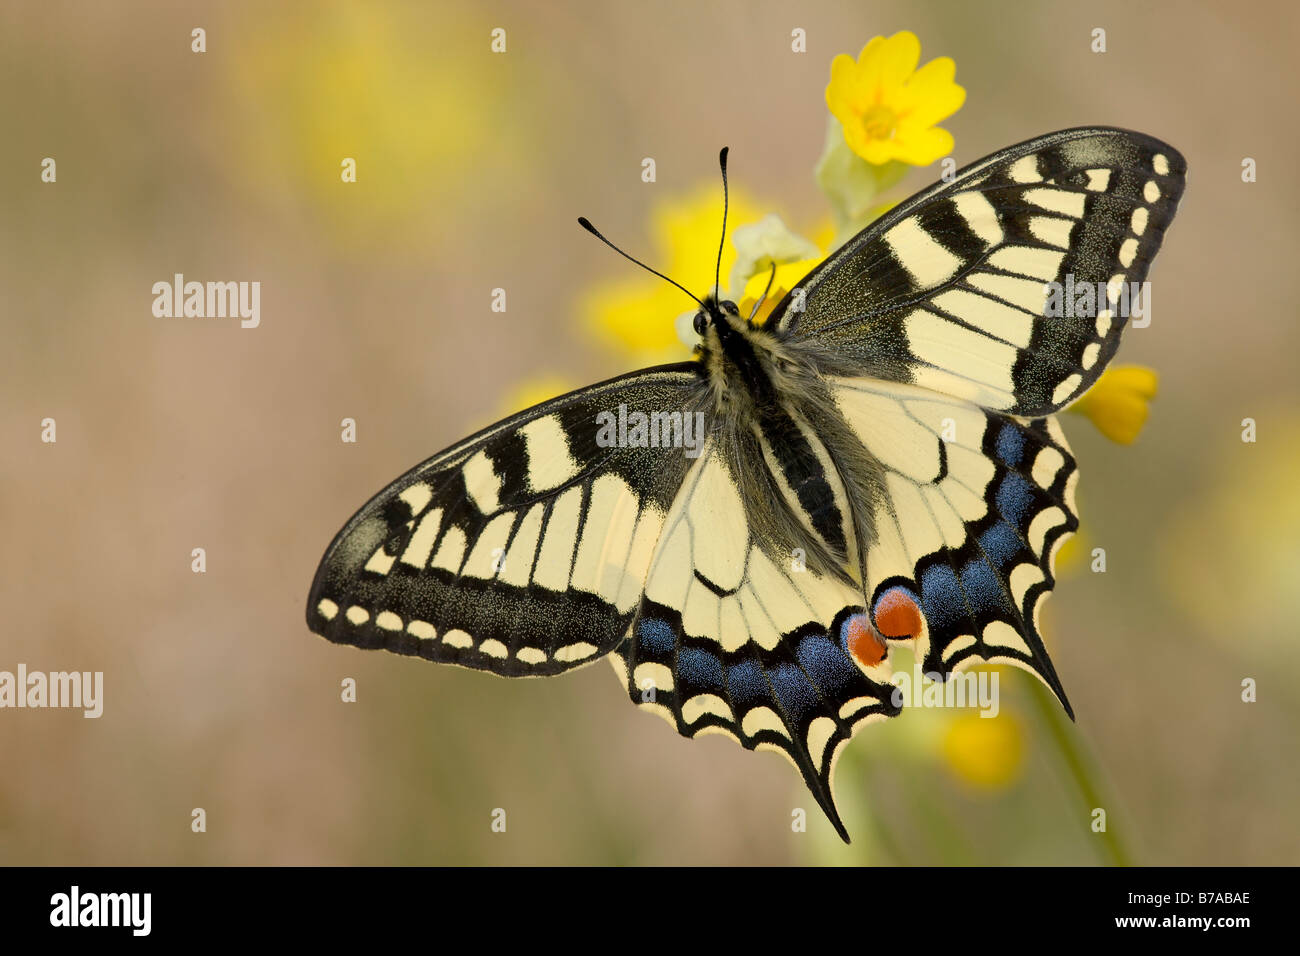 Old World Swallowtail Butterfly (Papilio machaon) resting on Cowslip (Primula veris), wings spread, Eichkogel near Moedling, Lo Stock Photo